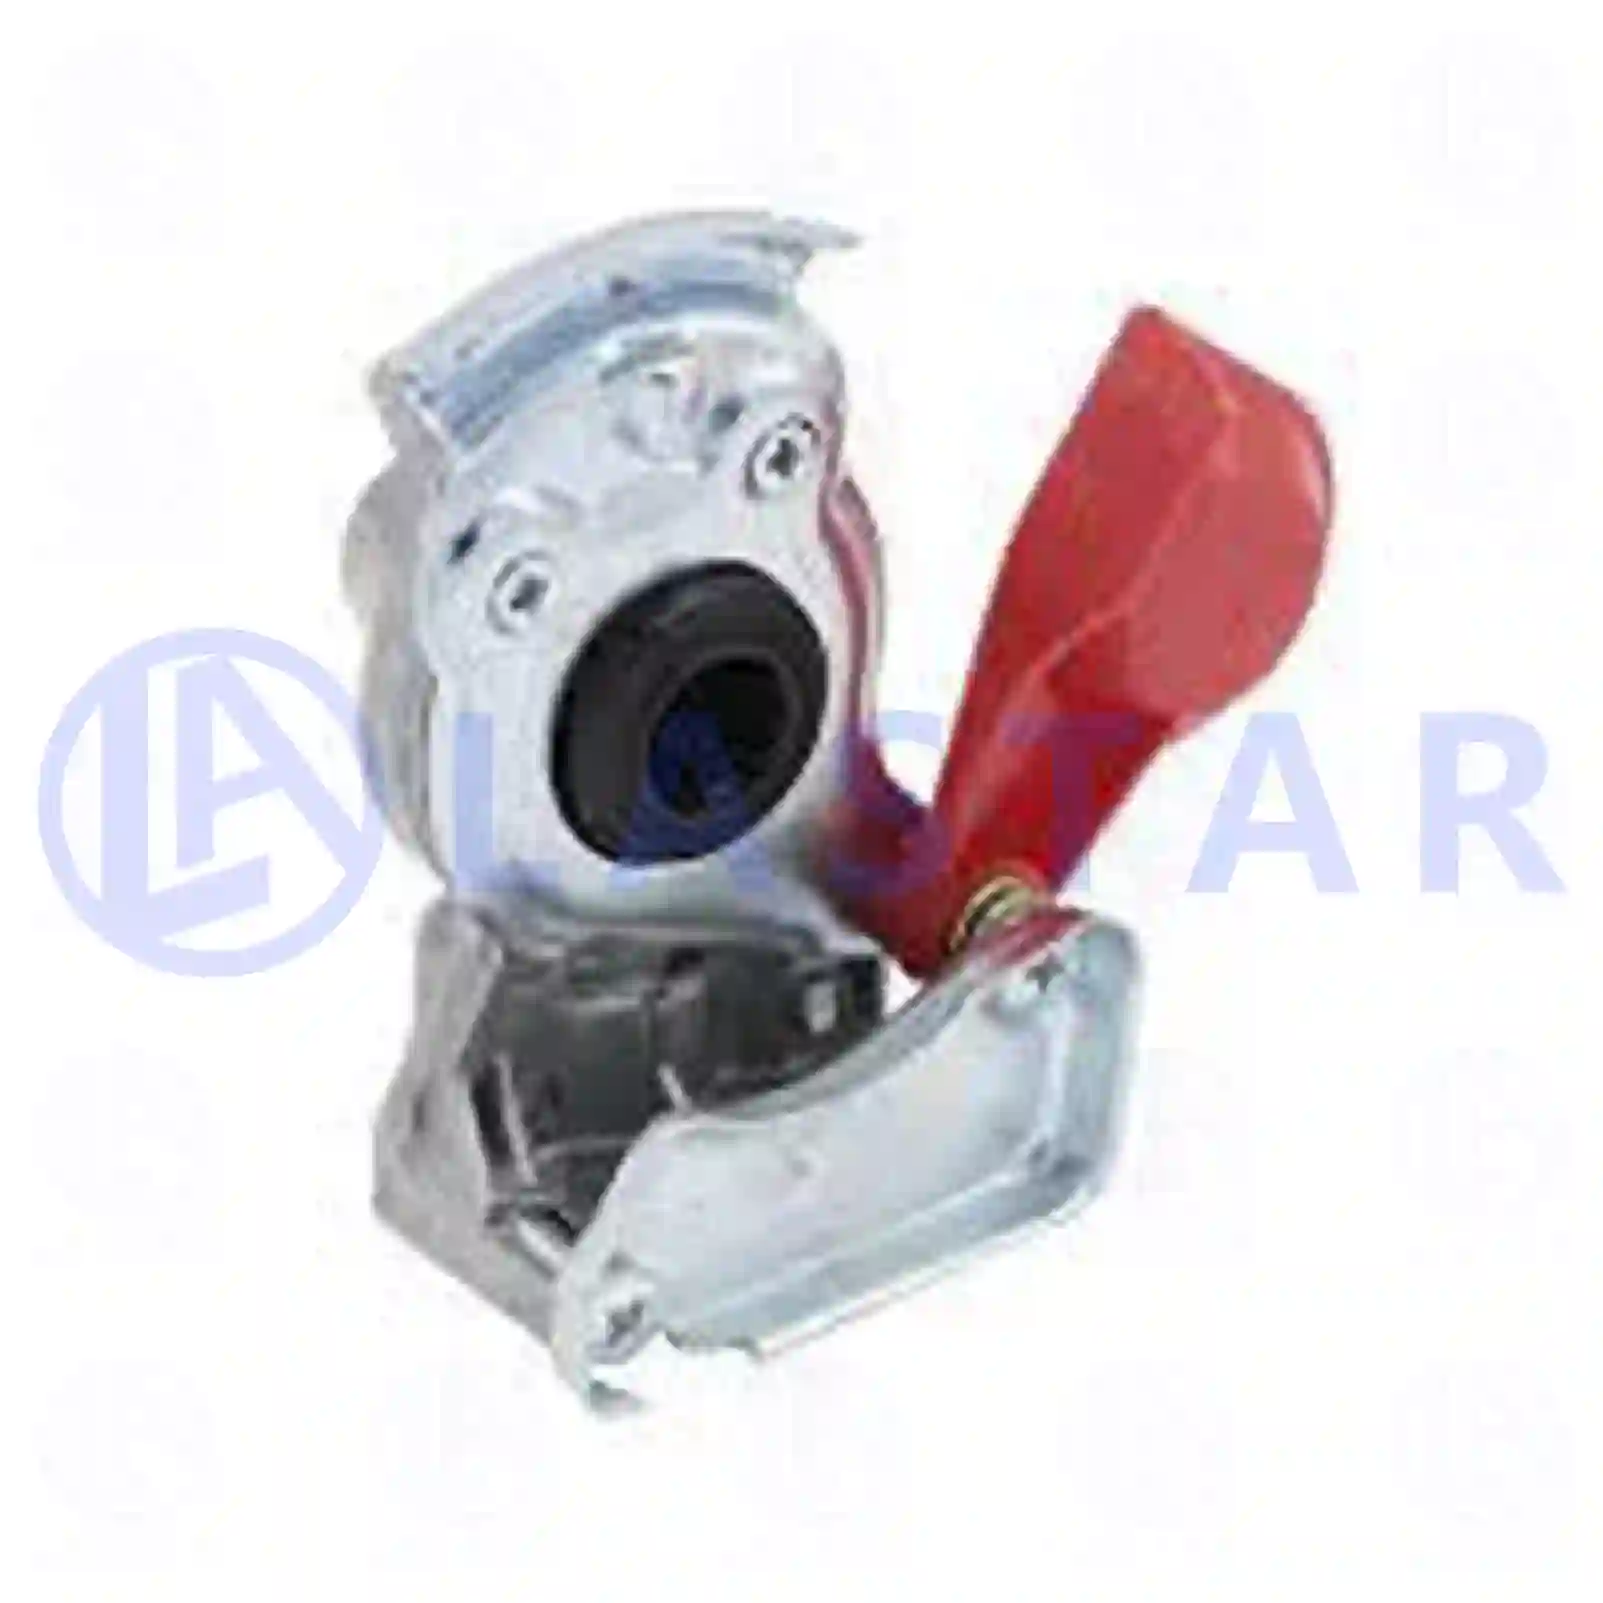 Palm coupling, automatic shutter, red lid, 77724721, 0109915, 109915, 1427369, 04680365, 61577724, 1599819, 04680365, 4680365, 61577724, 77408, 81512206024, 0004293530, 4522002110, 5000440154, 1504064, 1505064 ||  77724721 Lastar Spare Part | Truck Spare Parts, Auotomotive Spare Parts Palm coupling, automatic shutter, red lid, 77724721, 0109915, 109915, 1427369, 04680365, 61577724, 1599819, 04680365, 4680365, 61577724, 77408, 81512206024, 0004293530, 4522002110, 5000440154, 1504064, 1505064 ||  77724721 Lastar Spare Part | Truck Spare Parts, Auotomotive Spare Parts